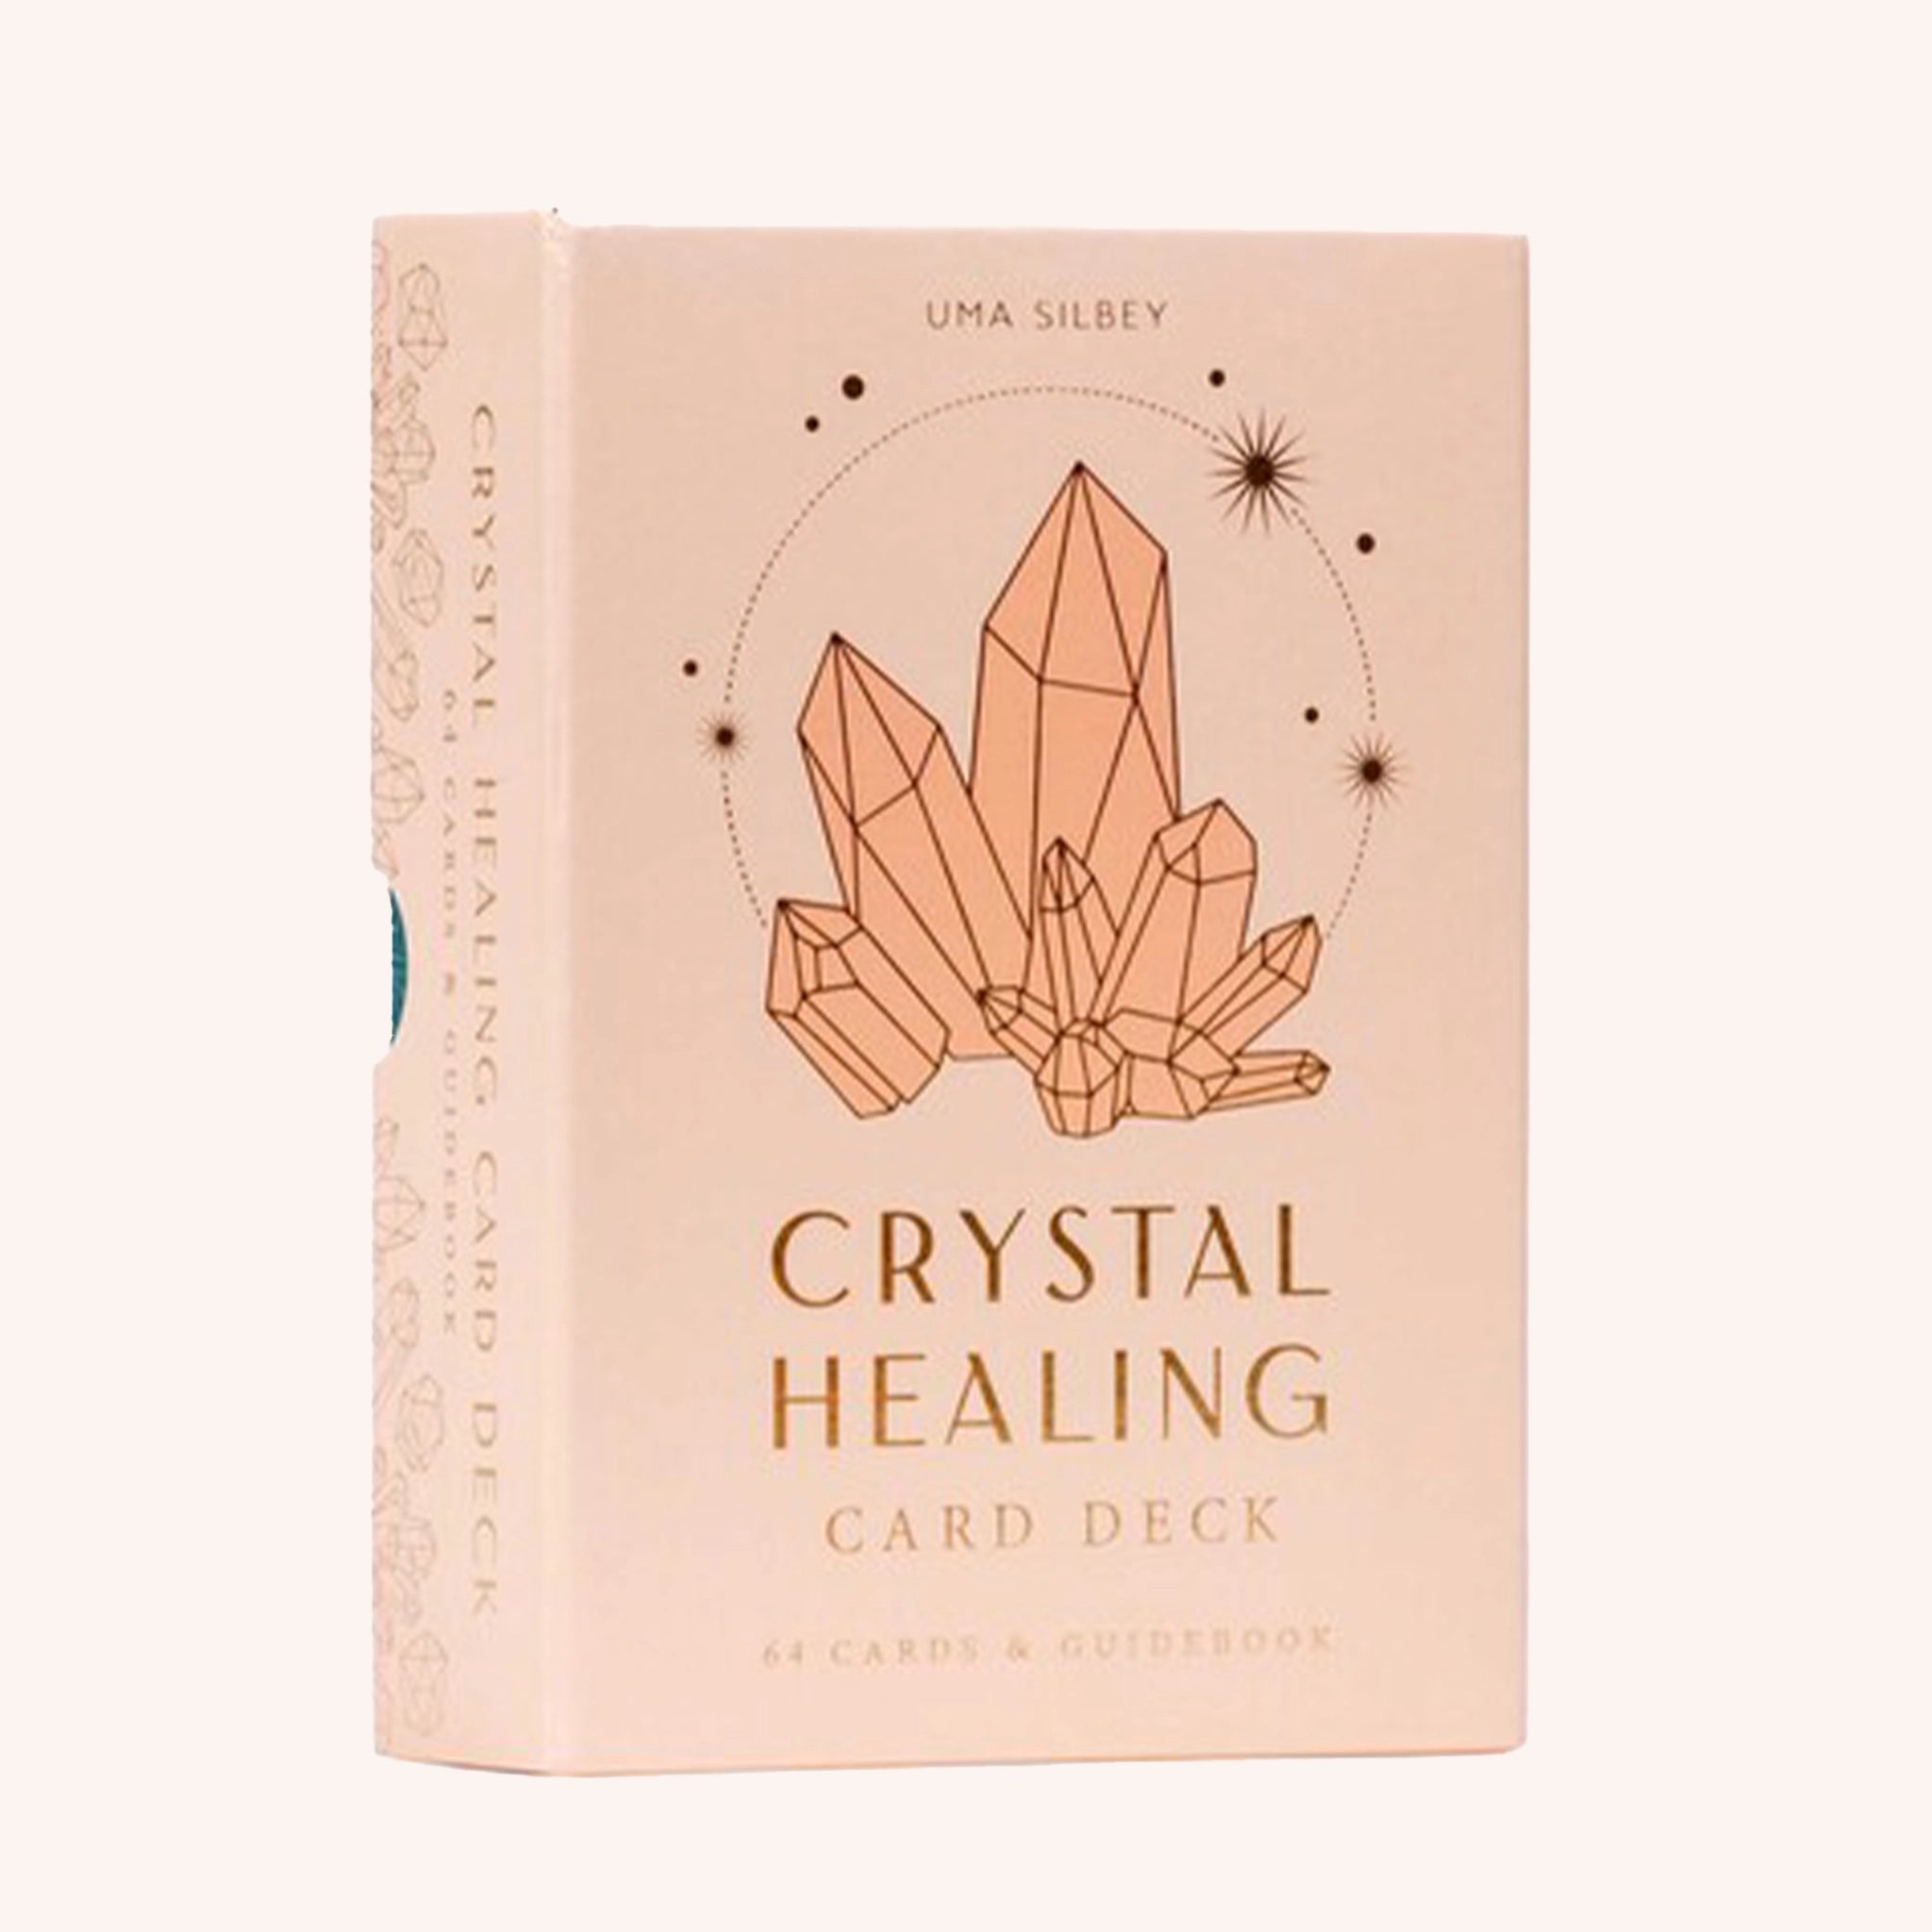 A salmon pink box of crystal cards with a graphic of crystals on the front and text that reads, "Crystal Healing Card Deck".